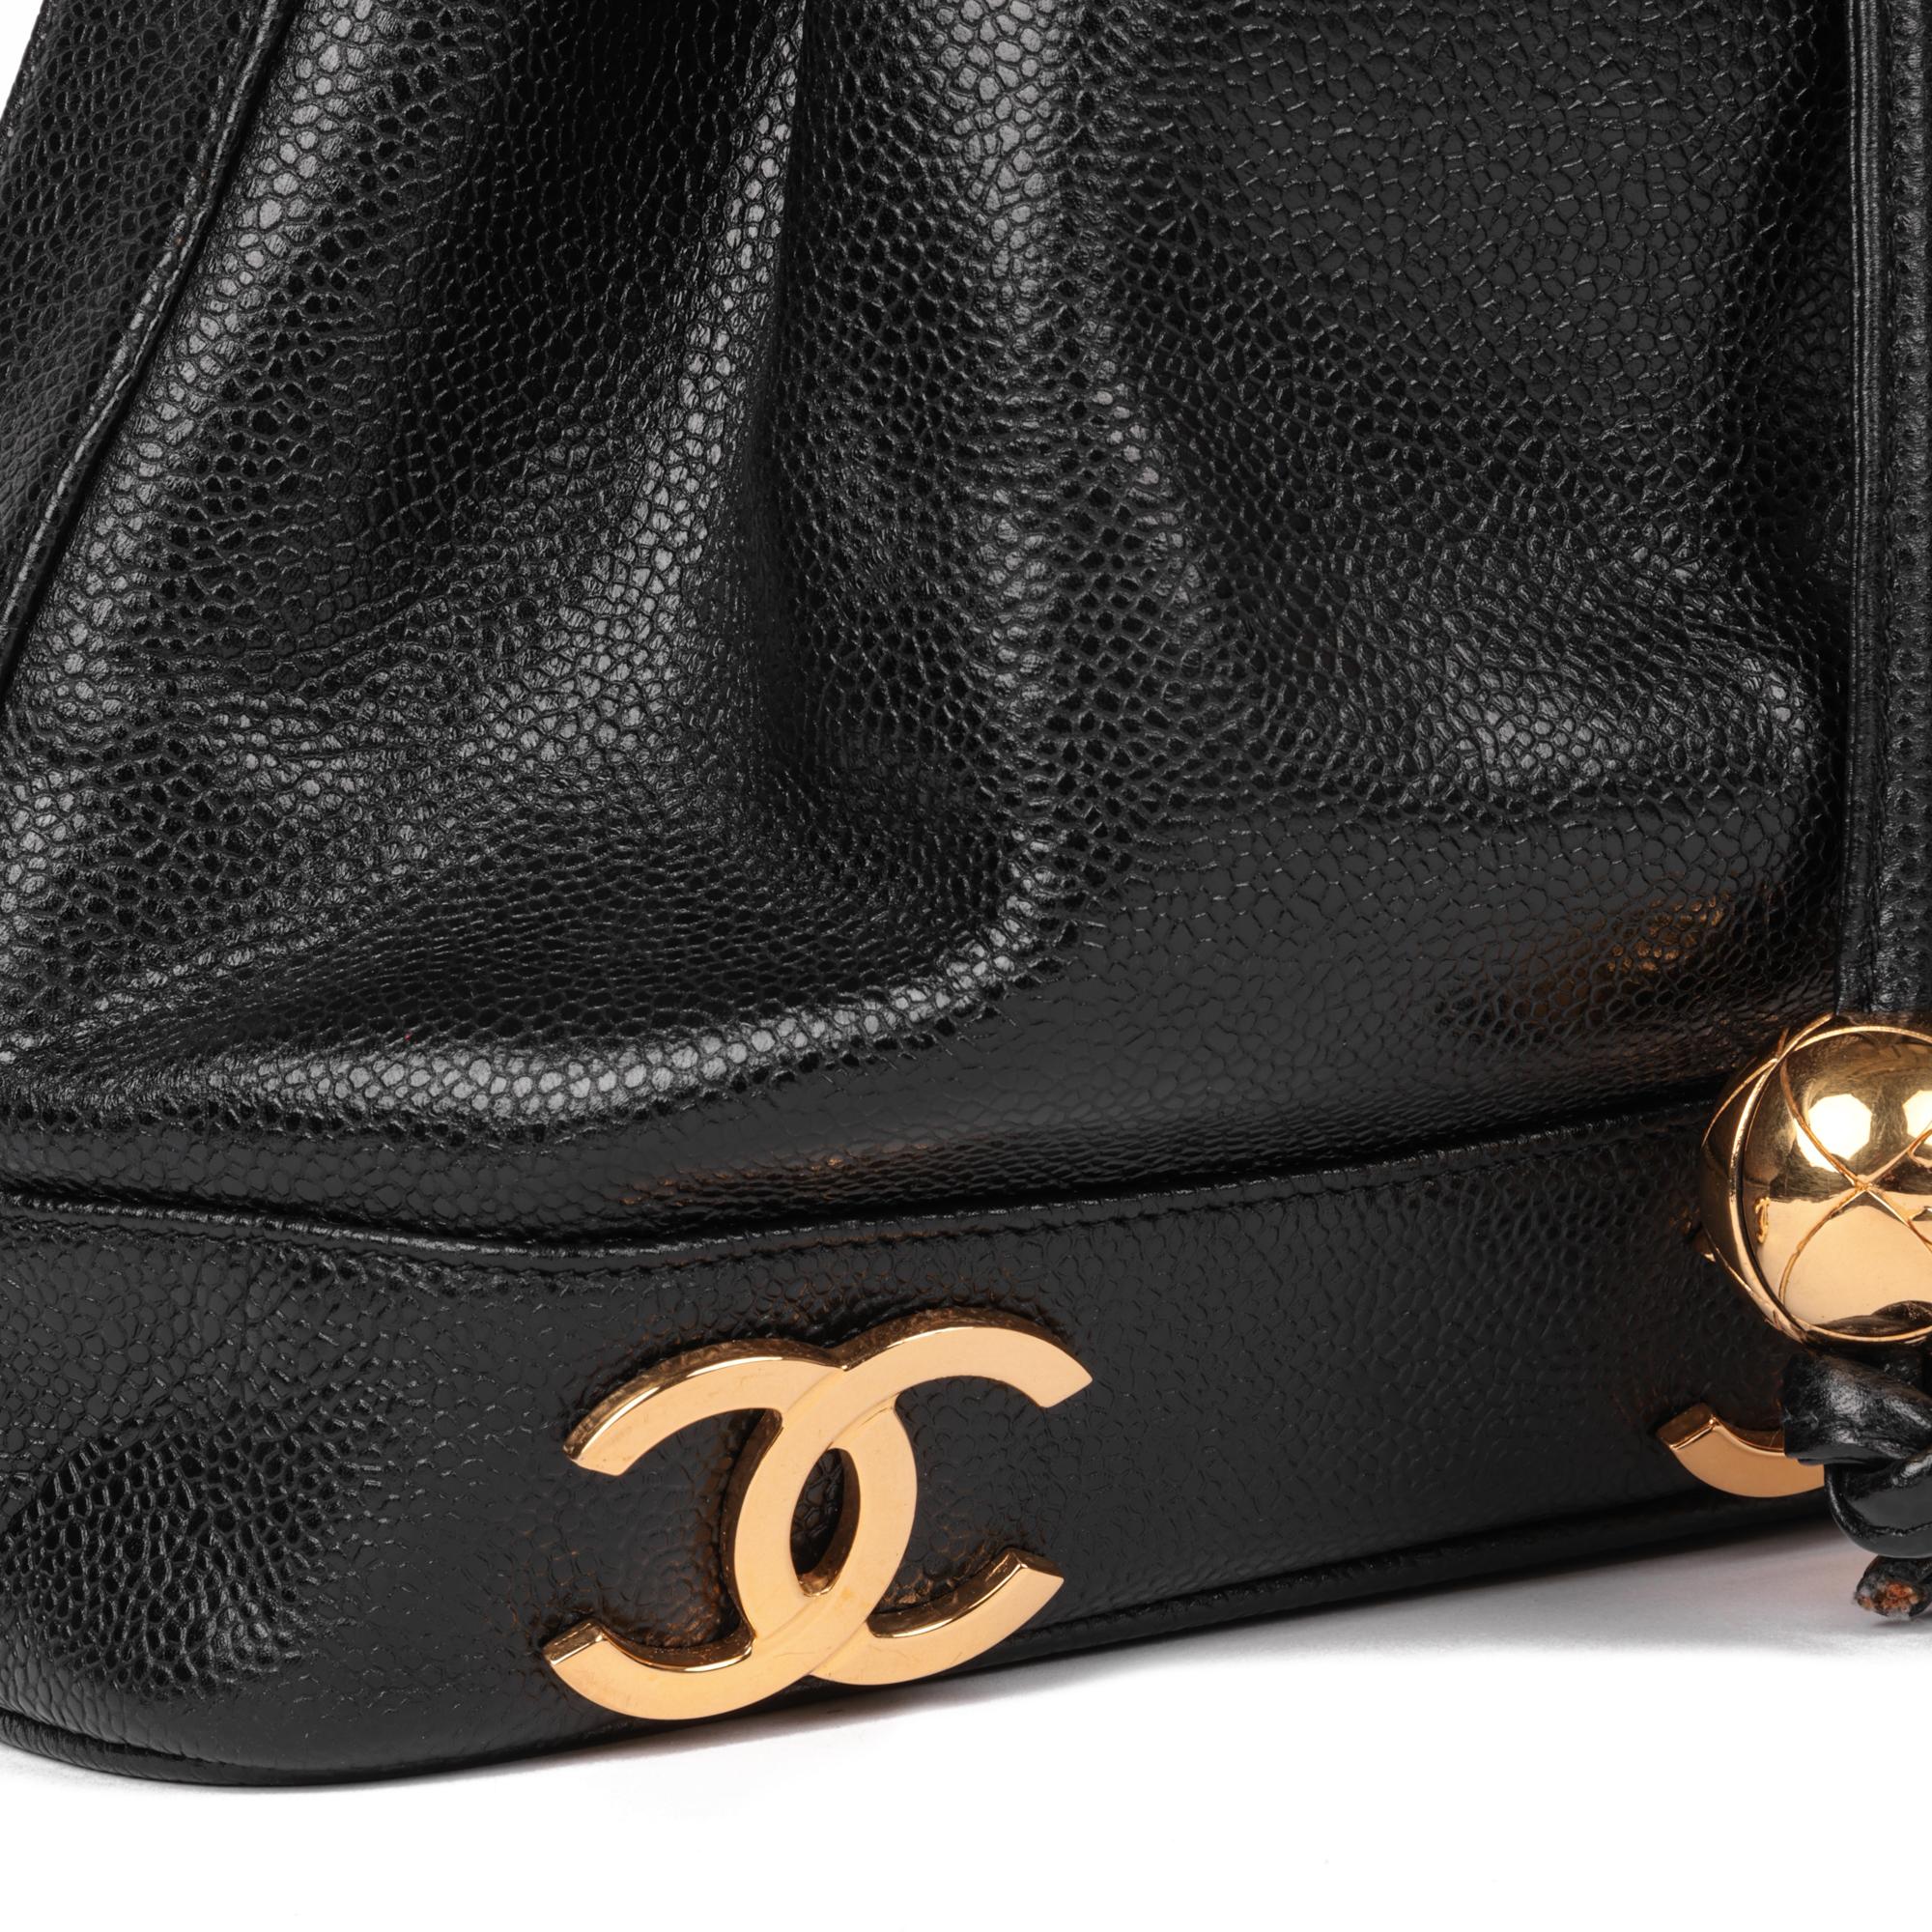 CHANEL Black Caviar Leather Vintage Classic Logo Trim Bucket Bag with Pouch 2